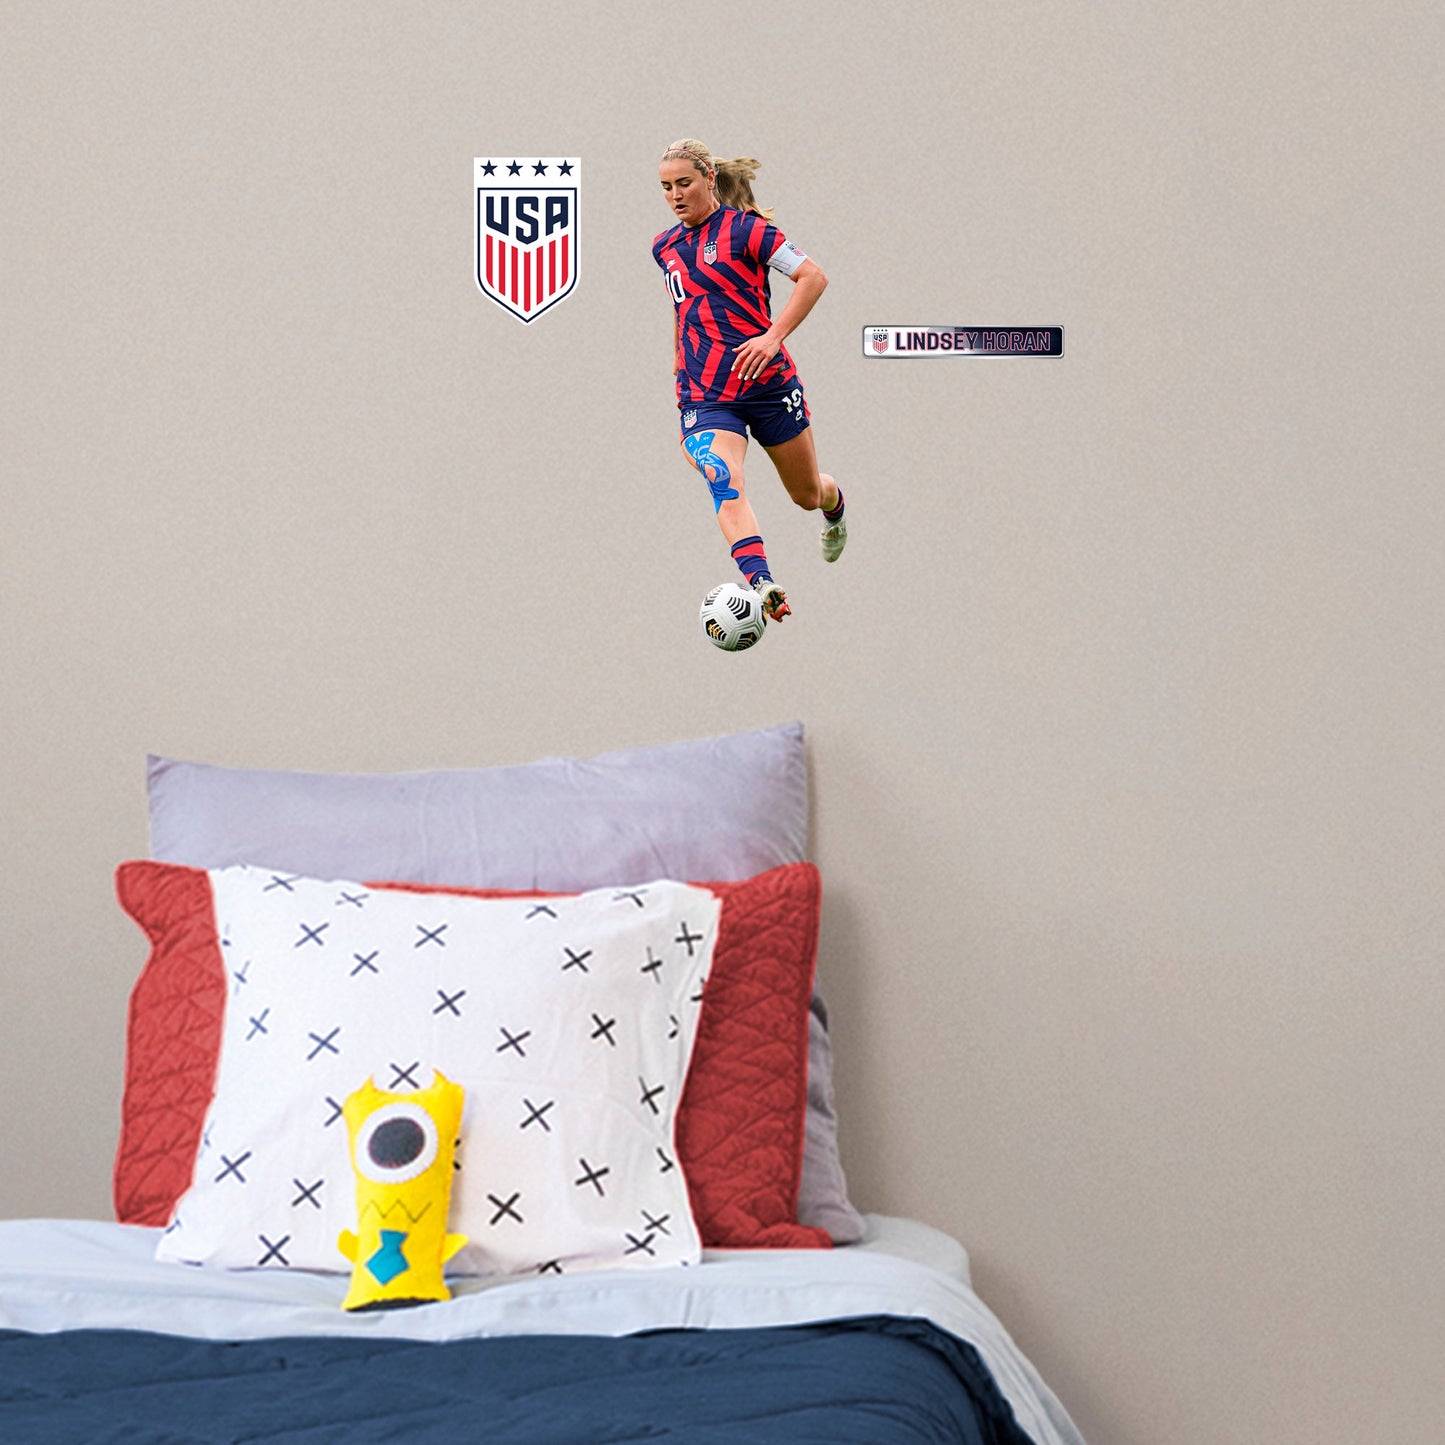 Lindsey Horan RealBig - Officially Licensed USWNT Removable Adhesive Decal